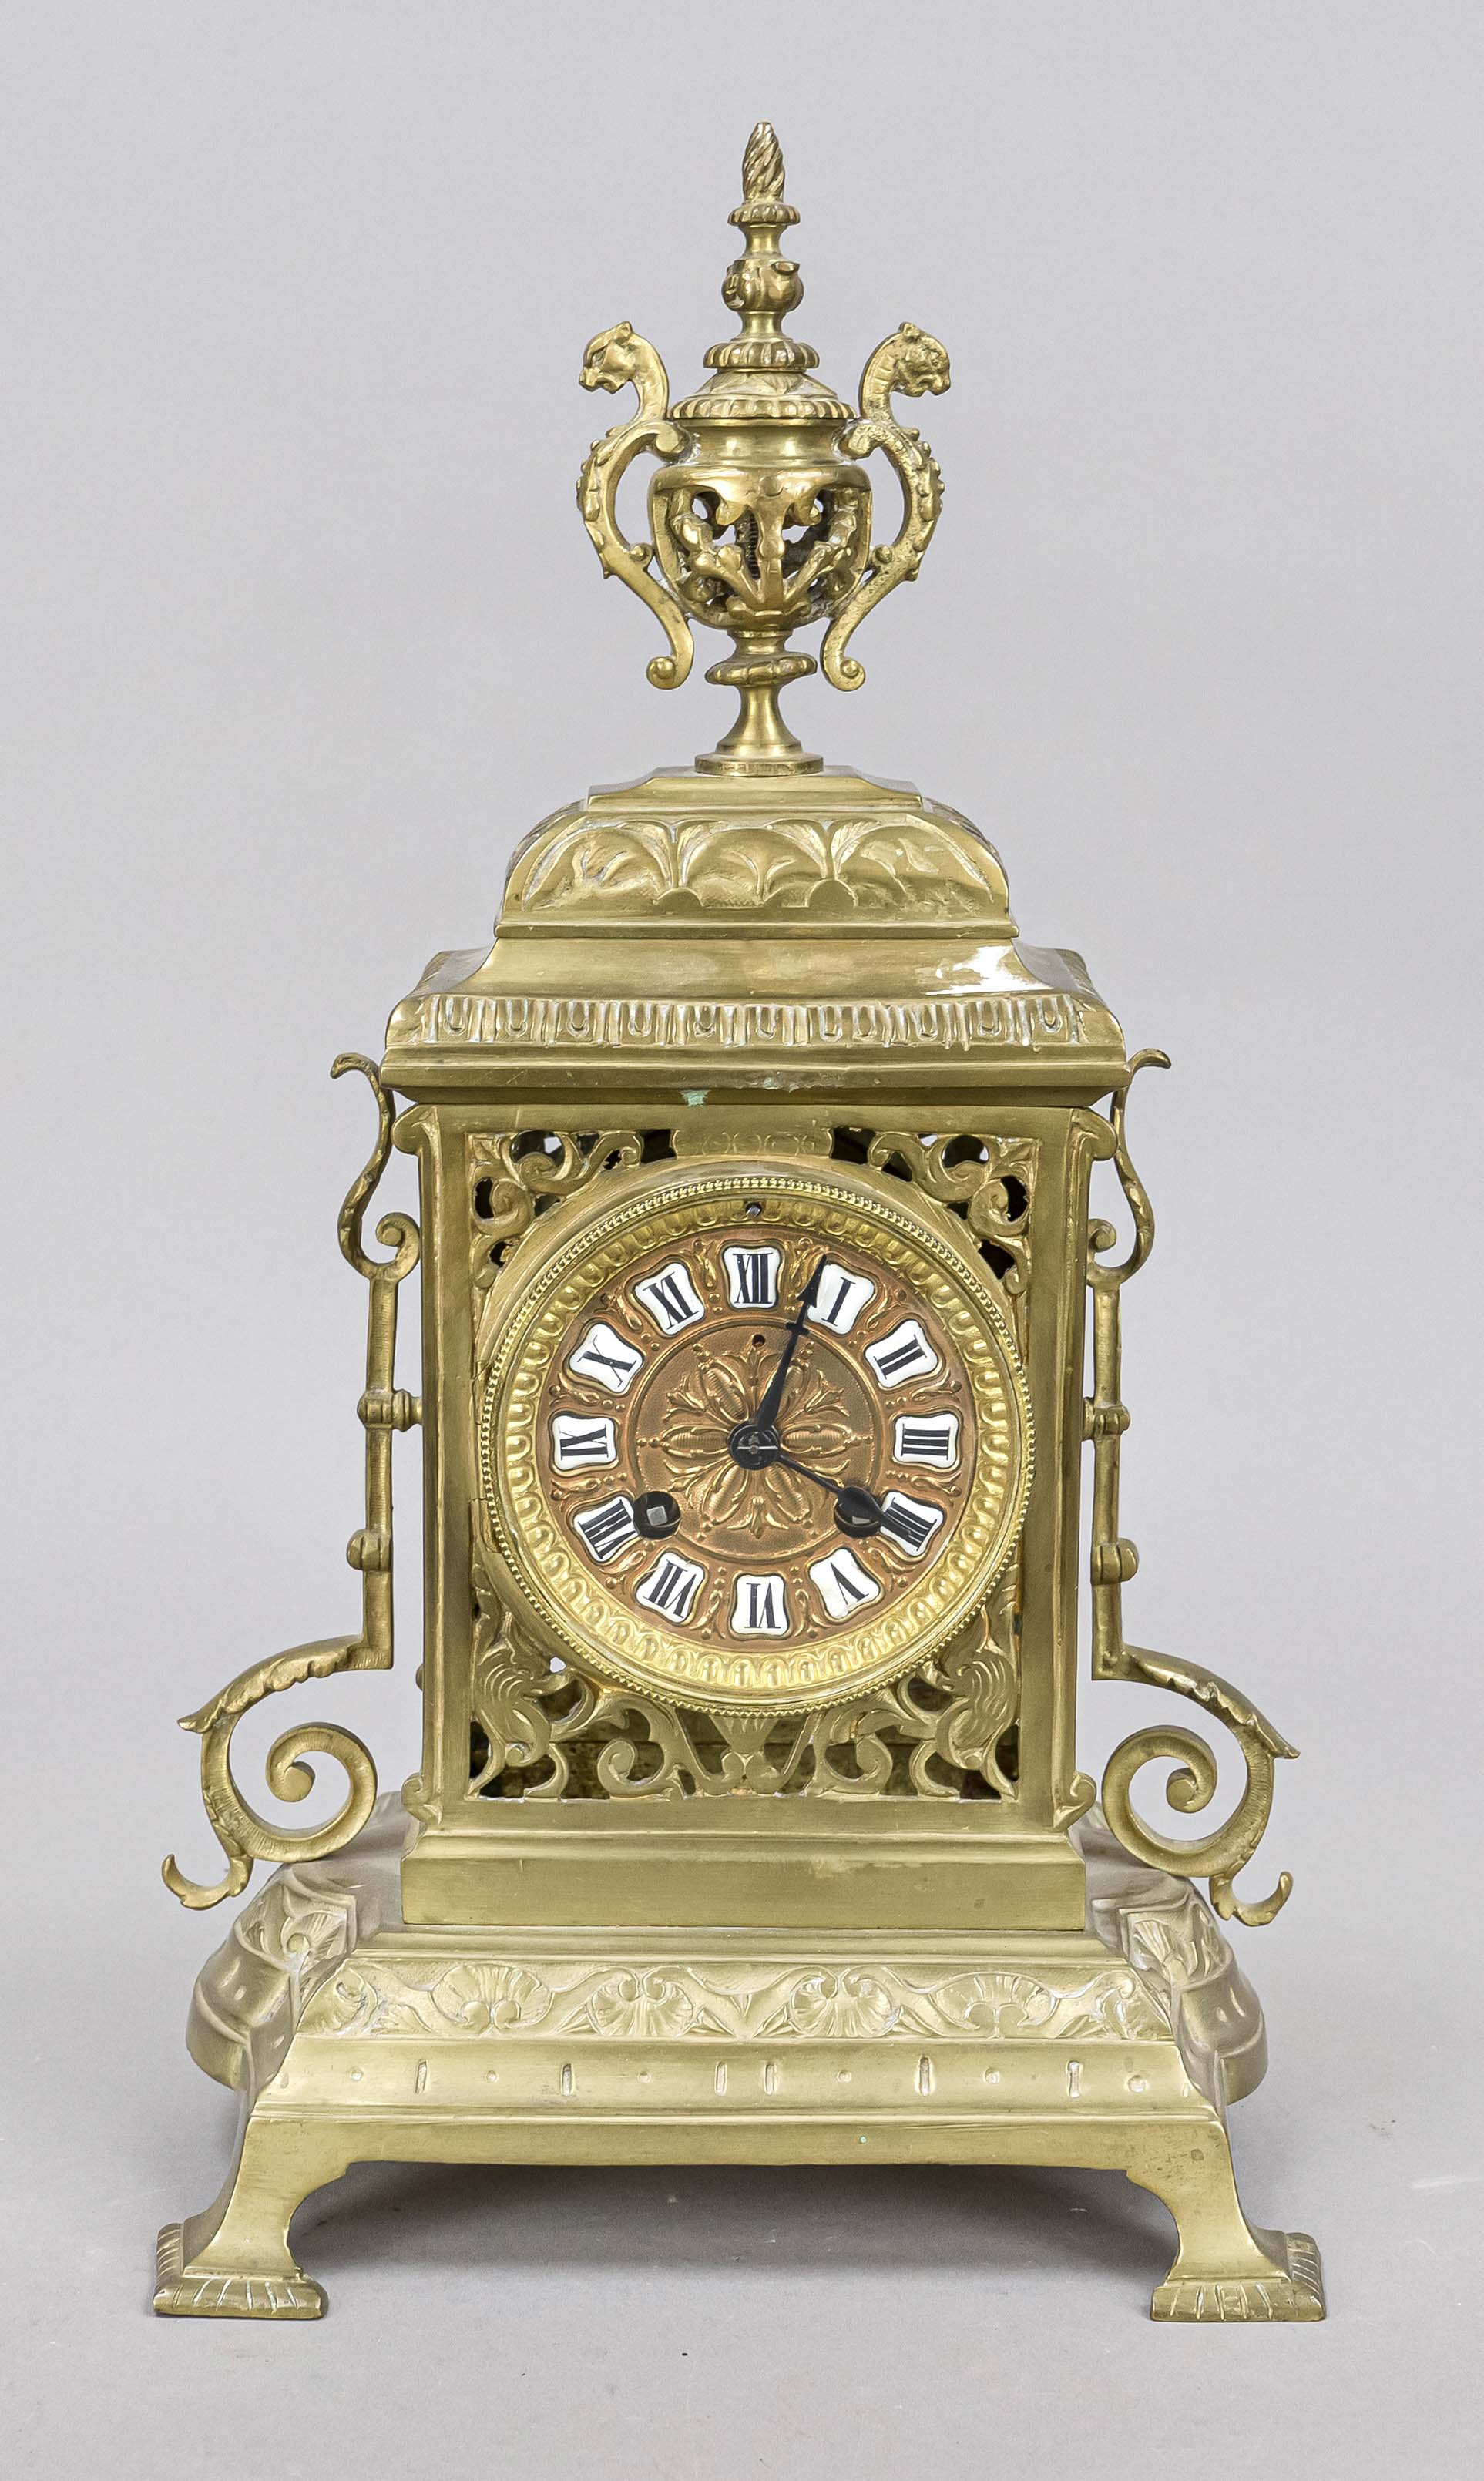 Brass table clock, c. 2nd half 19th century, cast case with openwork, decorated with rocailles,